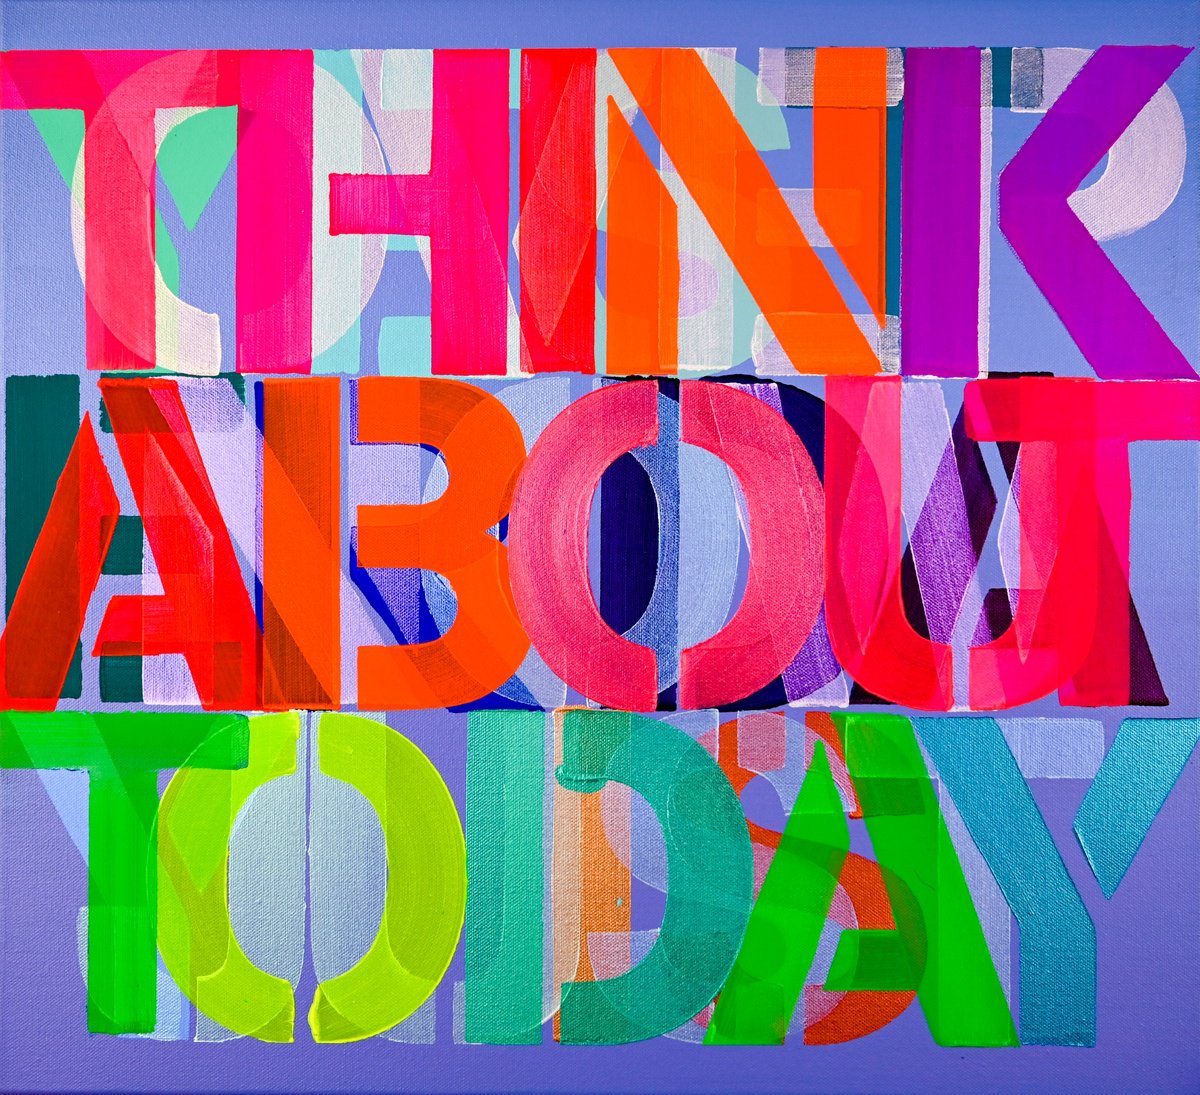 Think About Today by Niki Hare